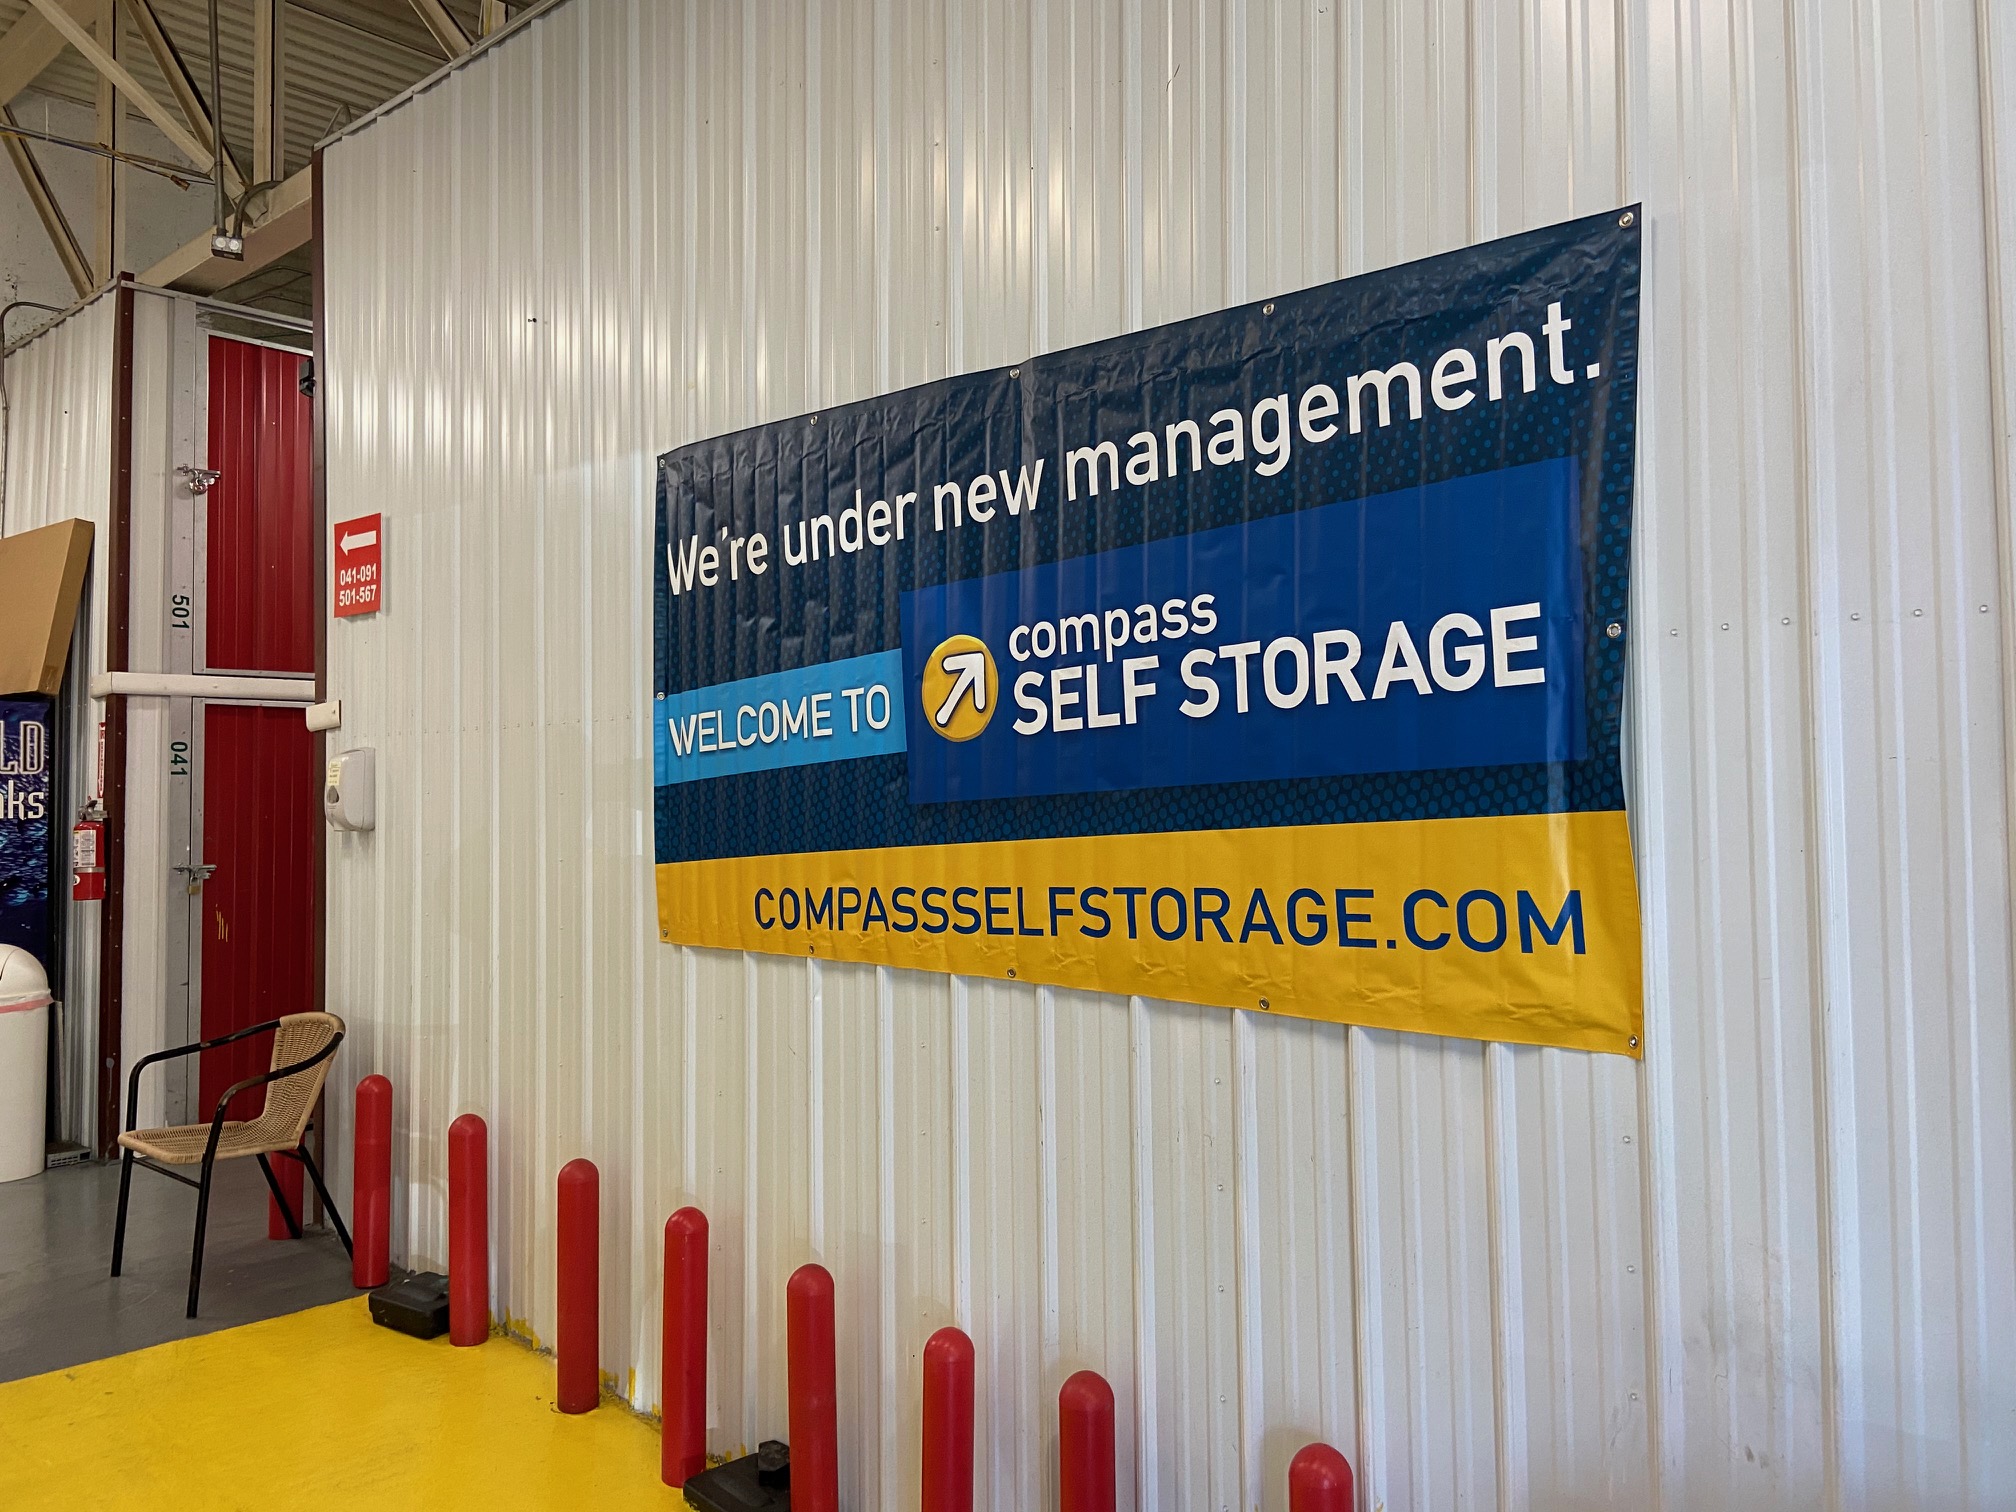 Compass Self Storage recently completed the acquisition of a self storage center with over 37,000 net rentable square feet in Miami, Florida.